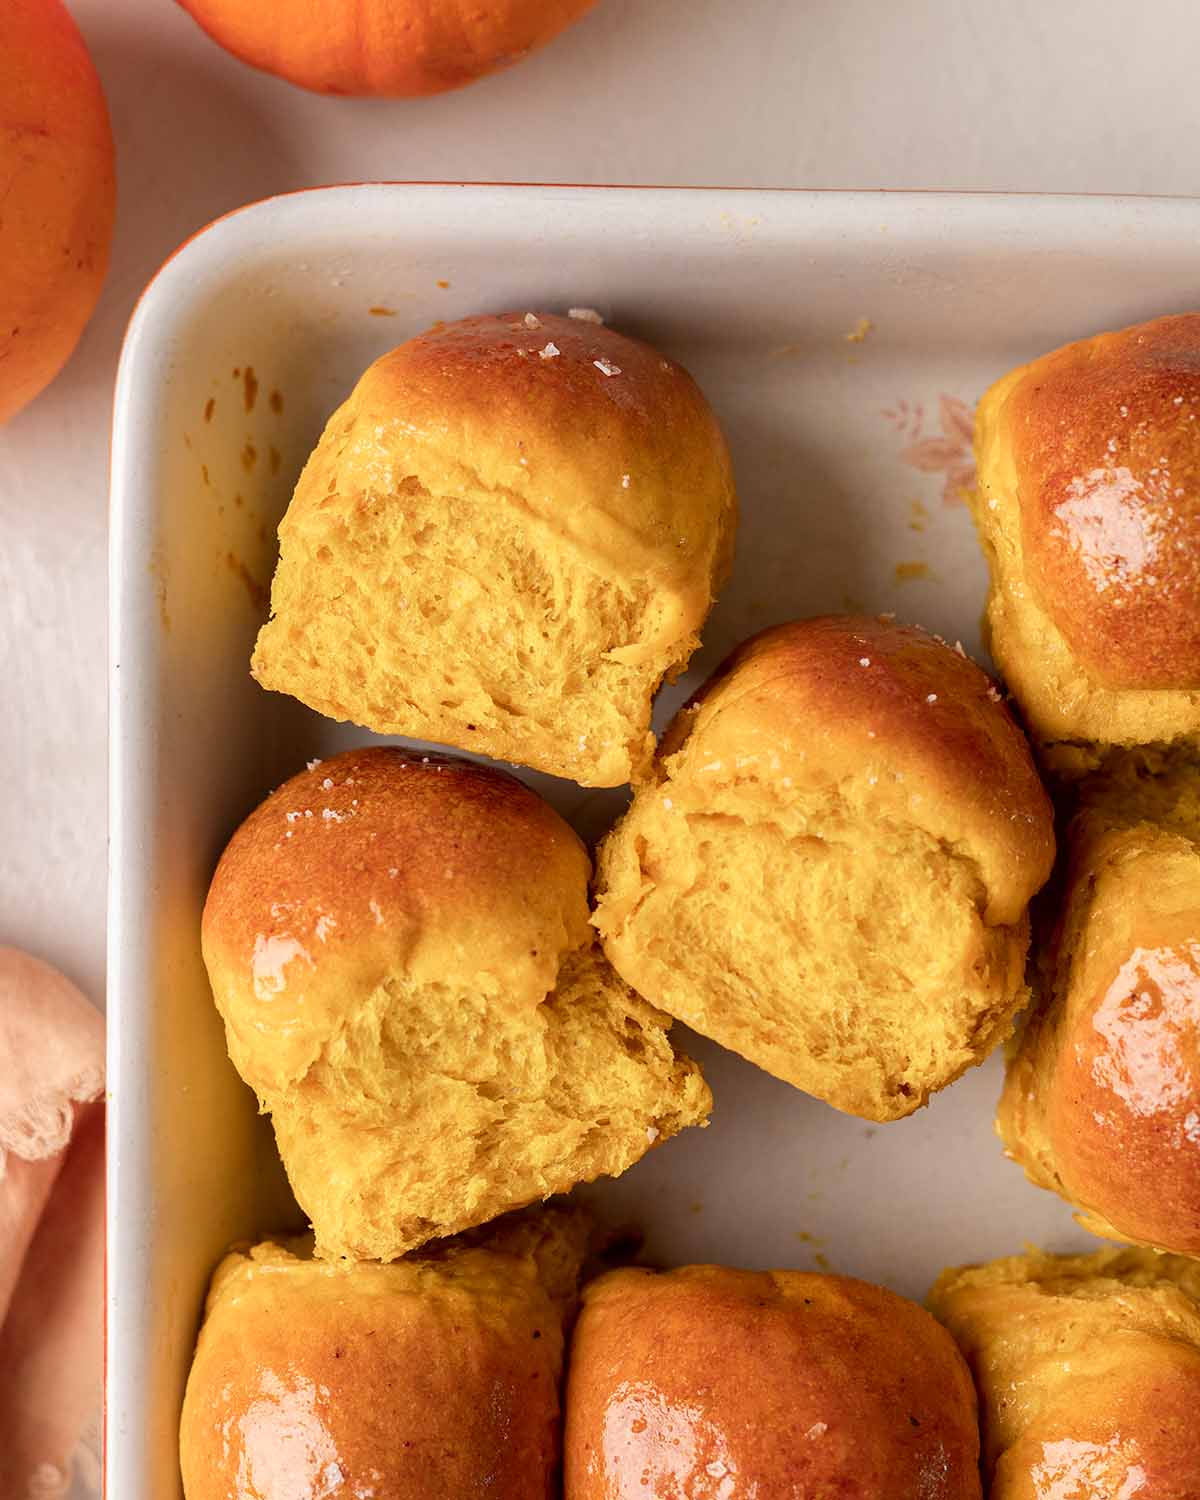 Baking tray filled with pumpkin rolls with a few on their side showing fluffy texture.